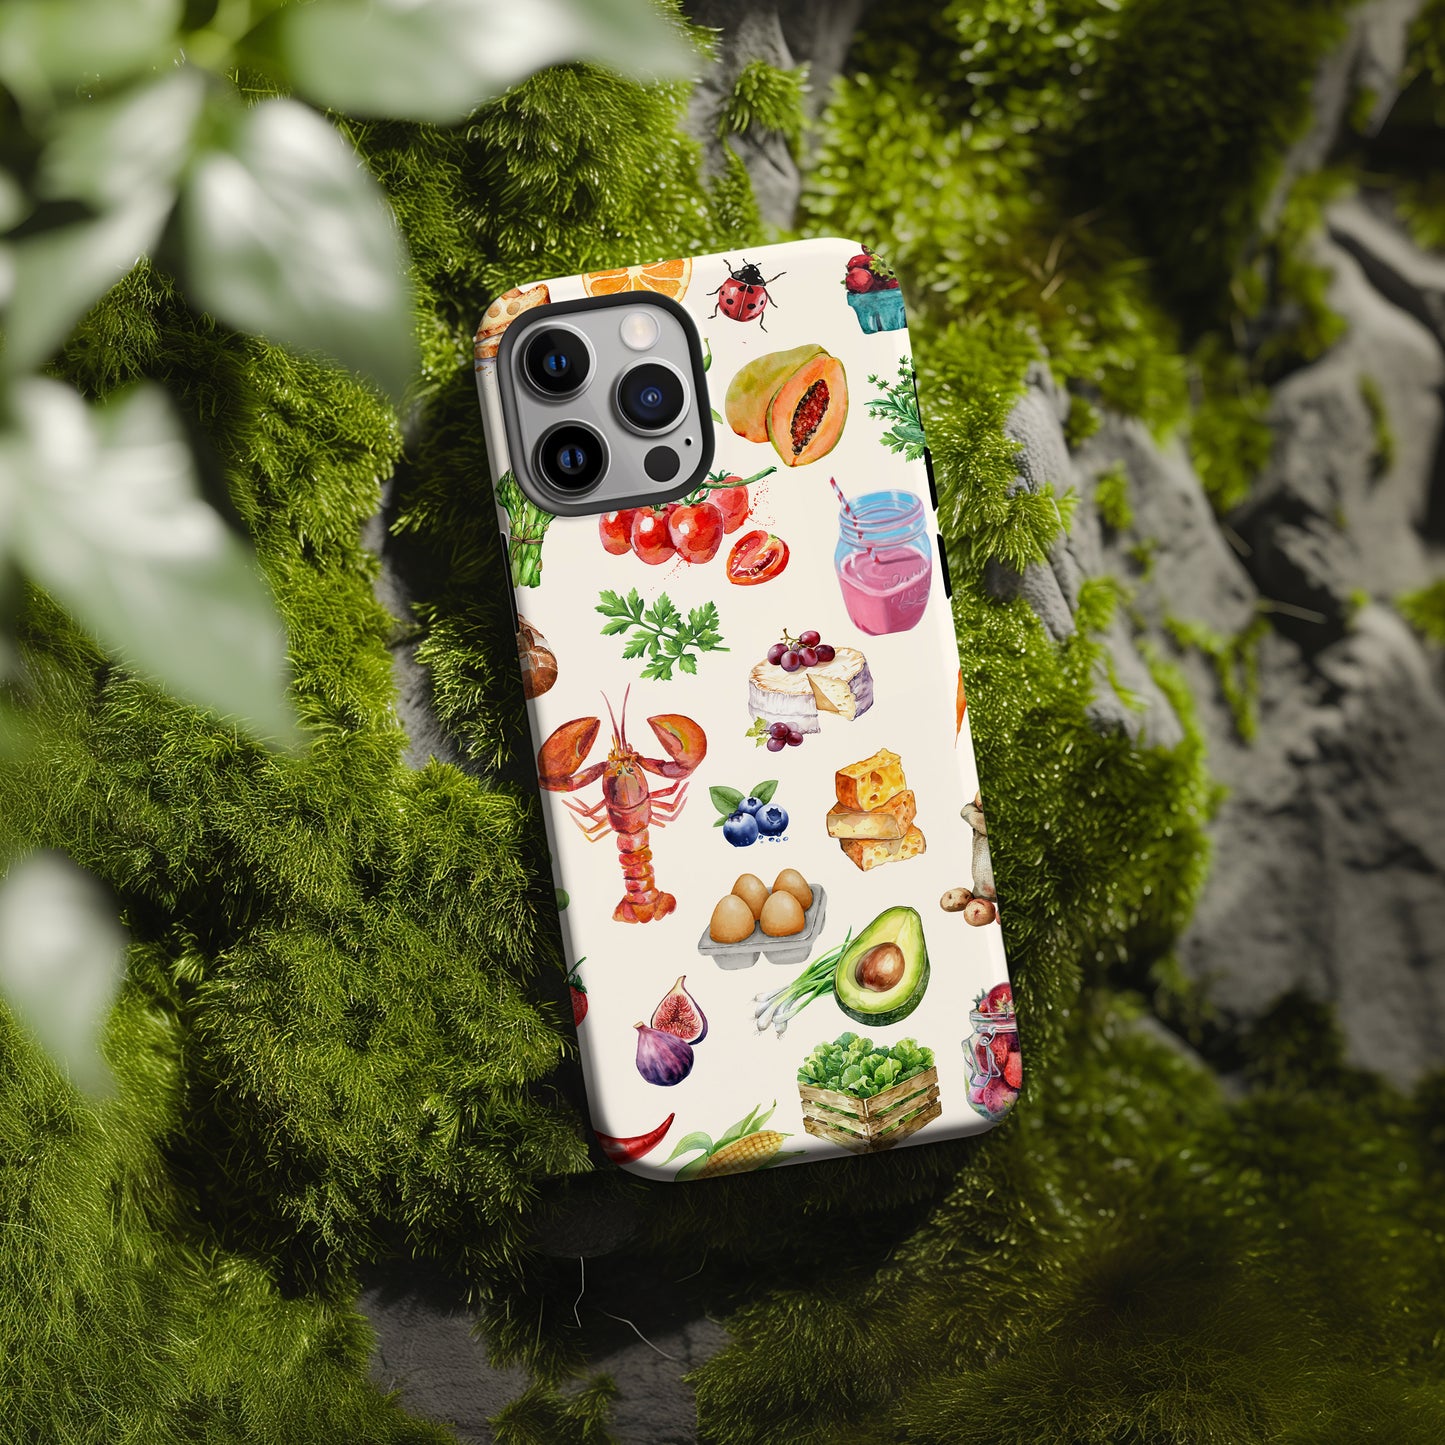 moss rock with farmer's market collage phone case. Scrapbook watercolor style with images of farm fresh food on a crem background. Phone case for iPhone and Samsung by Artscape Market